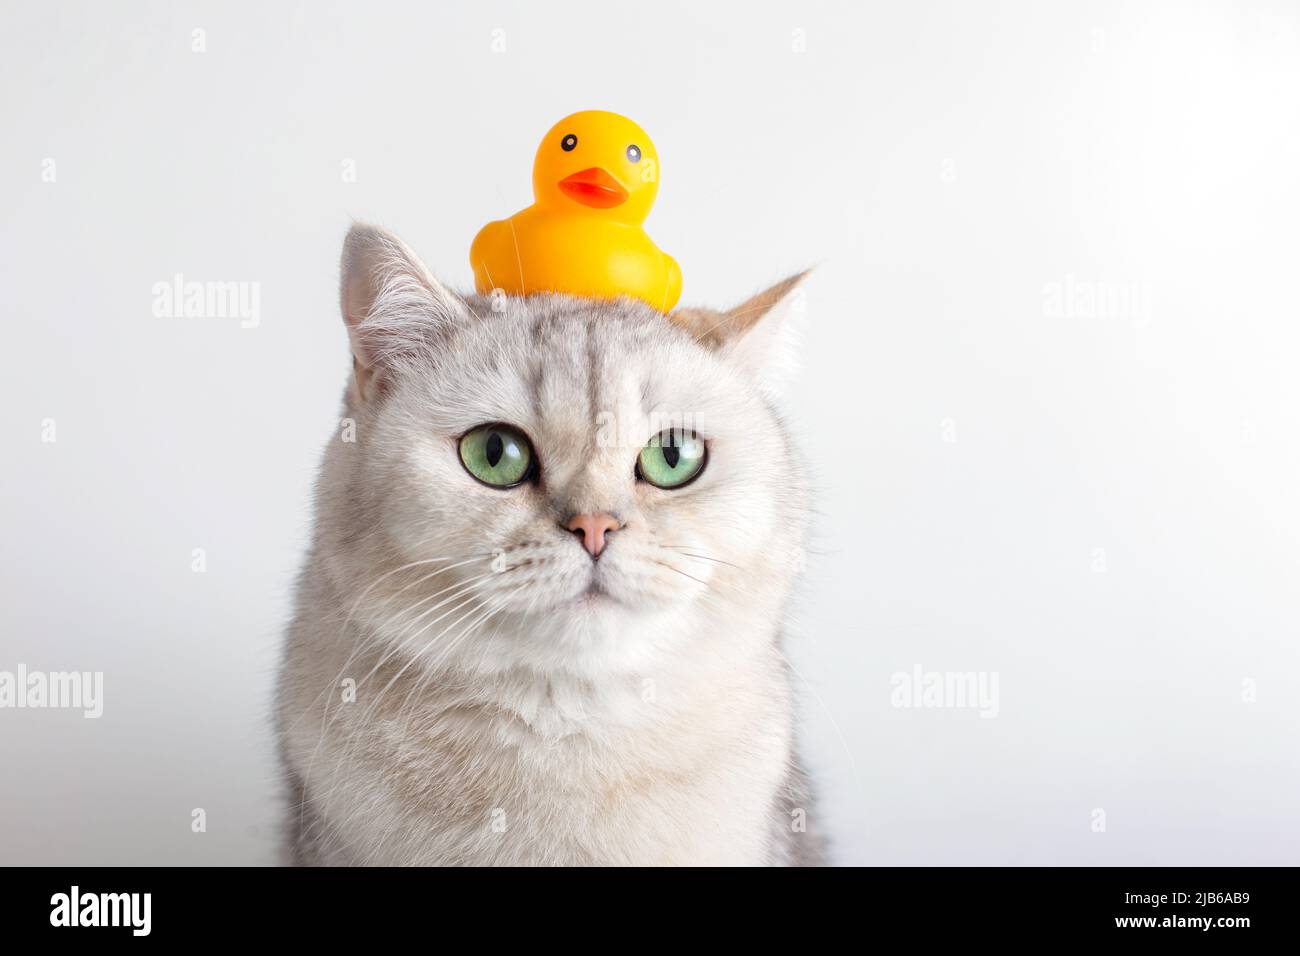 Cute white cat with a yellow rubber duck on his head, on a white background. Stock Photo